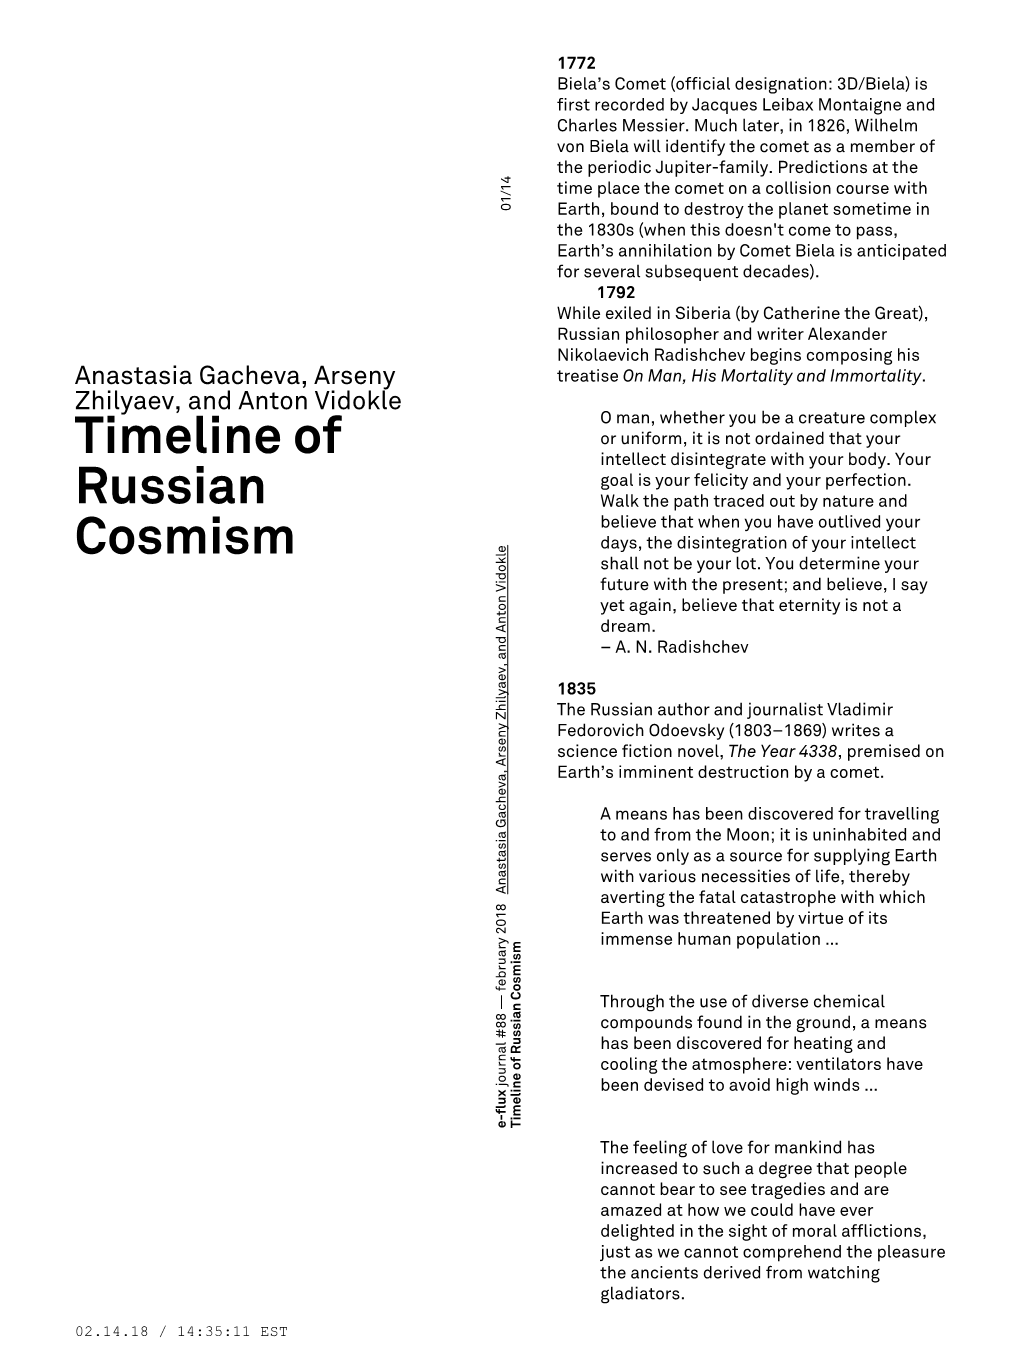 Timeline of Russian Cosmism